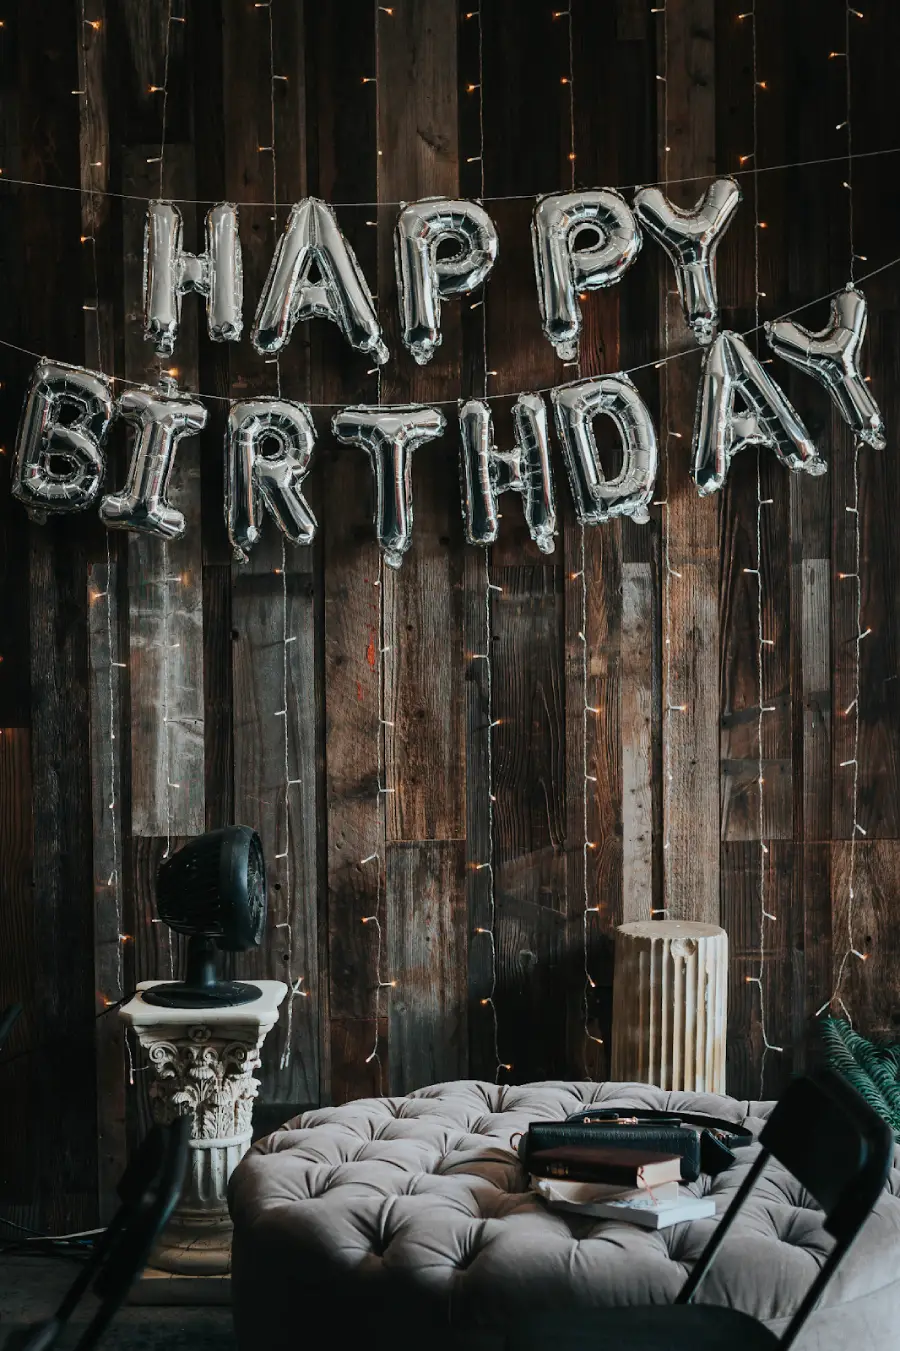 Planning Your Birthday Party? Check Out These Easy-To-Use Packages